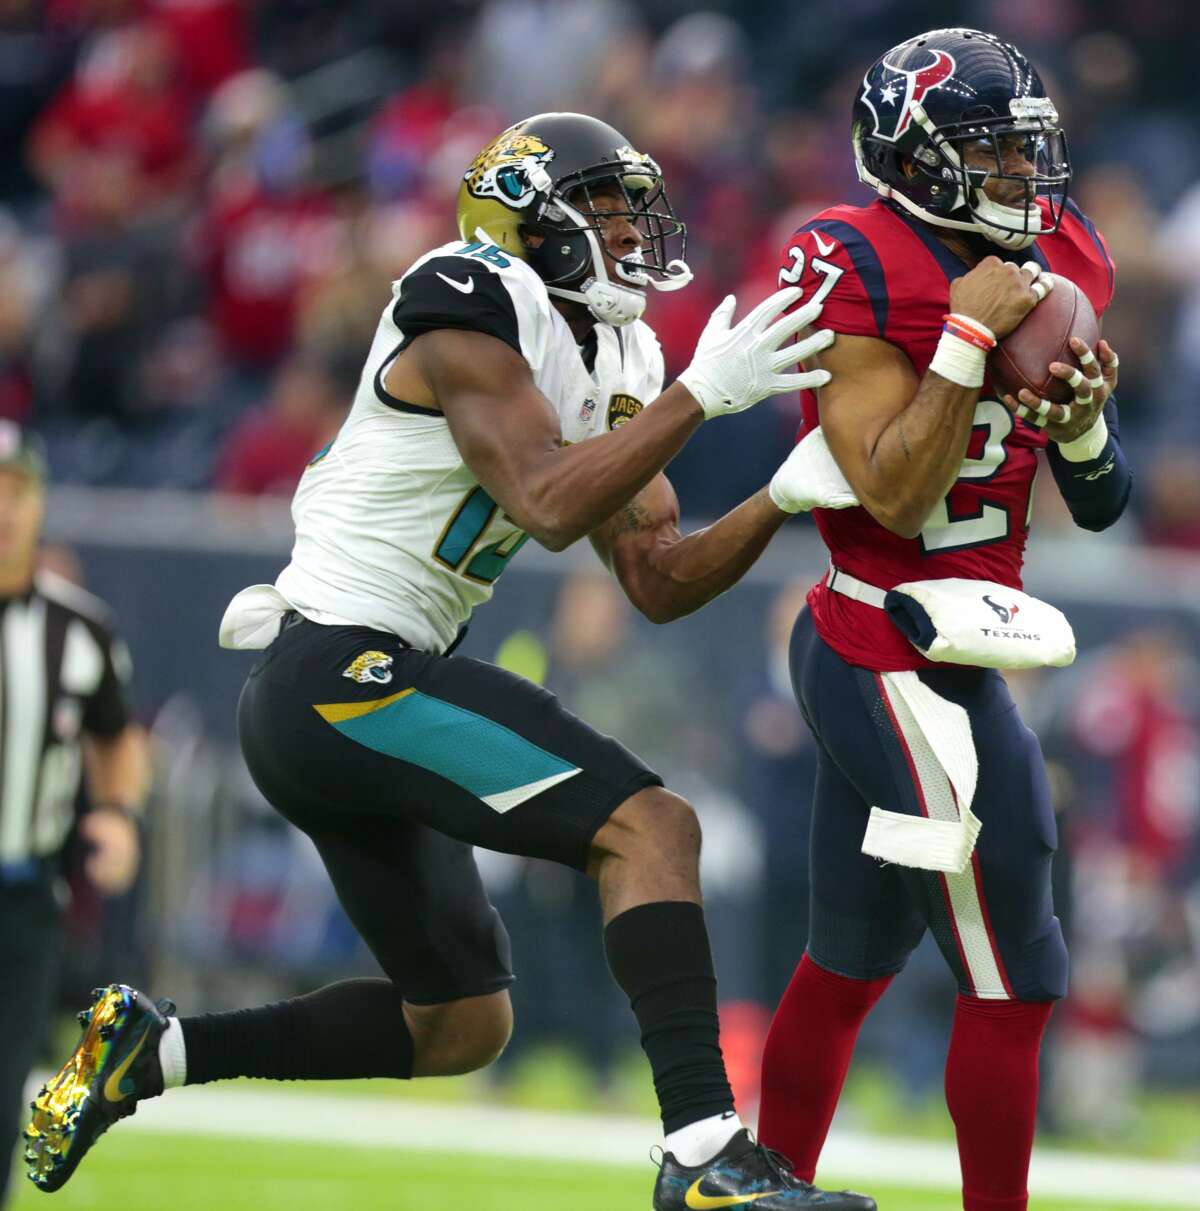 Houston Texans strong safety Quintin Demps (27) intercepts a pass intended for Jacksonville Jaguars wide receiver Allen Robinson (15) during the fourth quarter of an NFL football game at NRG Stadium on Sunday, Dec. 18, 2016, in Houston. ( Brett Coomer / Houston Chronicle )